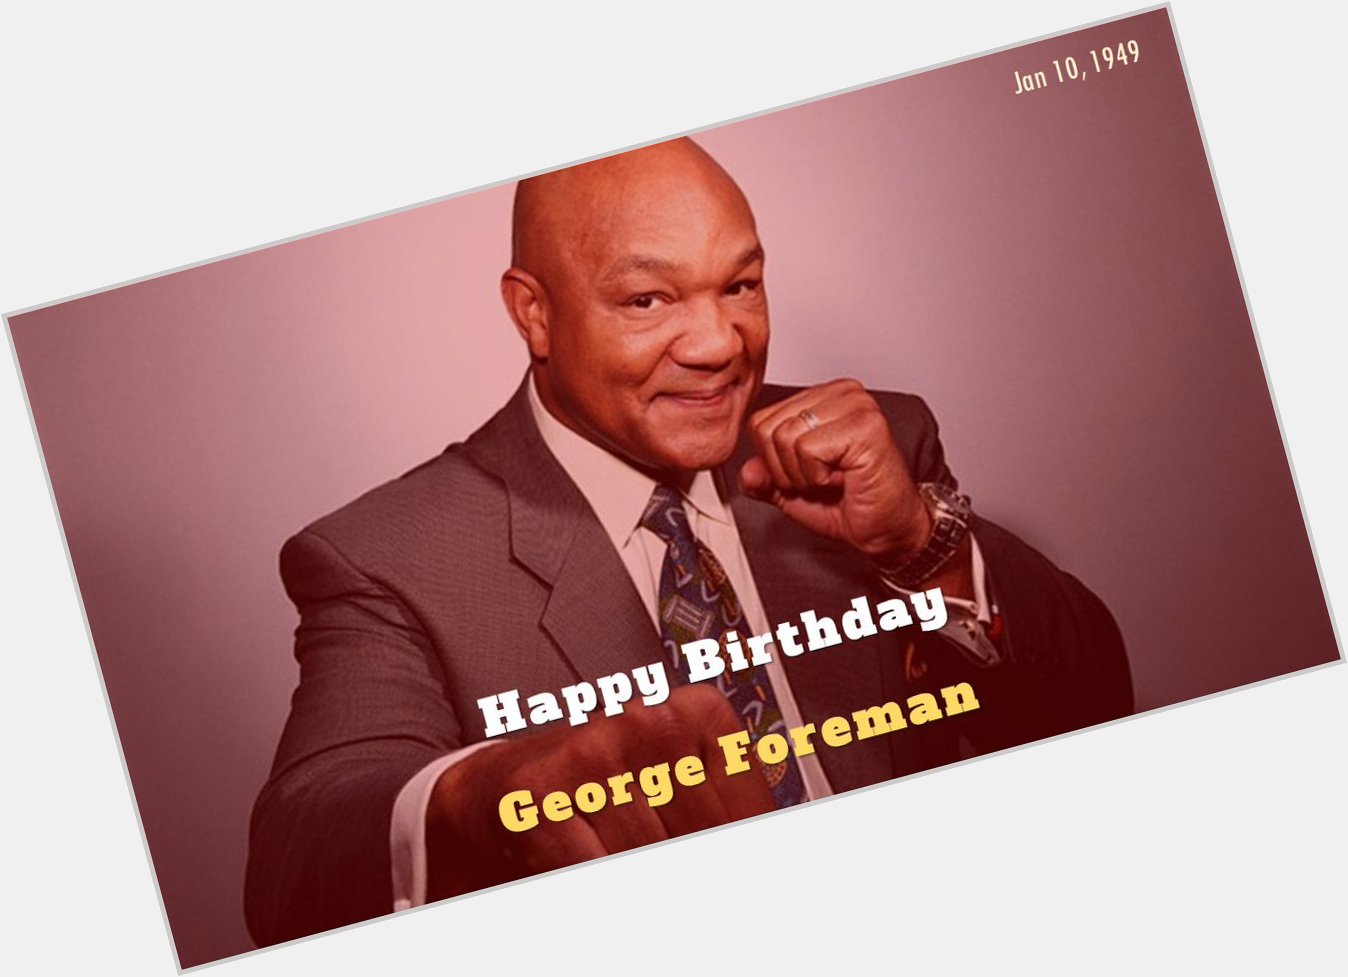 Happy Birthday, George Foreman, the oldest ever Heavyweight boxing champ; born today in 1949   